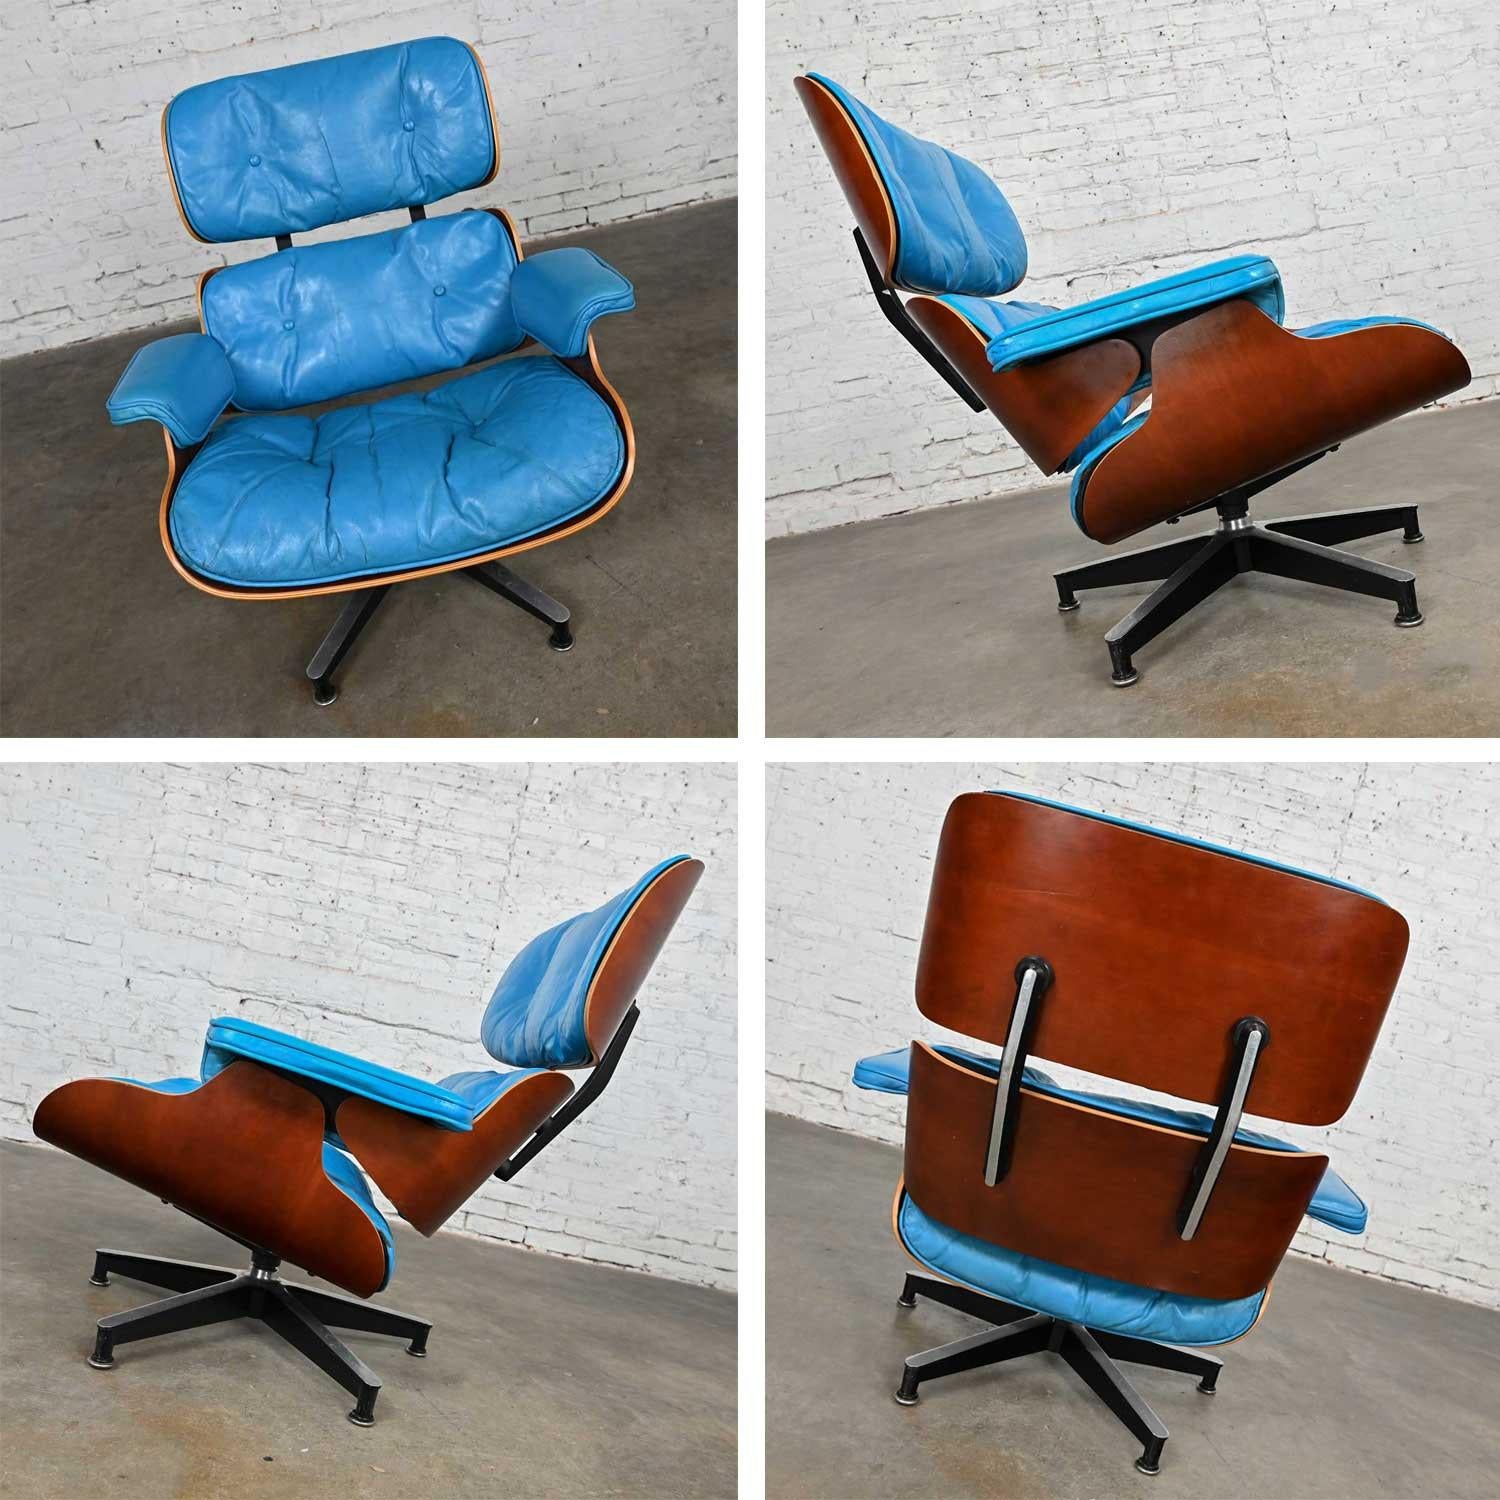 Eames 670 Lounge Chair 671 Ottoman Blue Leather Walnut Rosewood Herman Miller 11